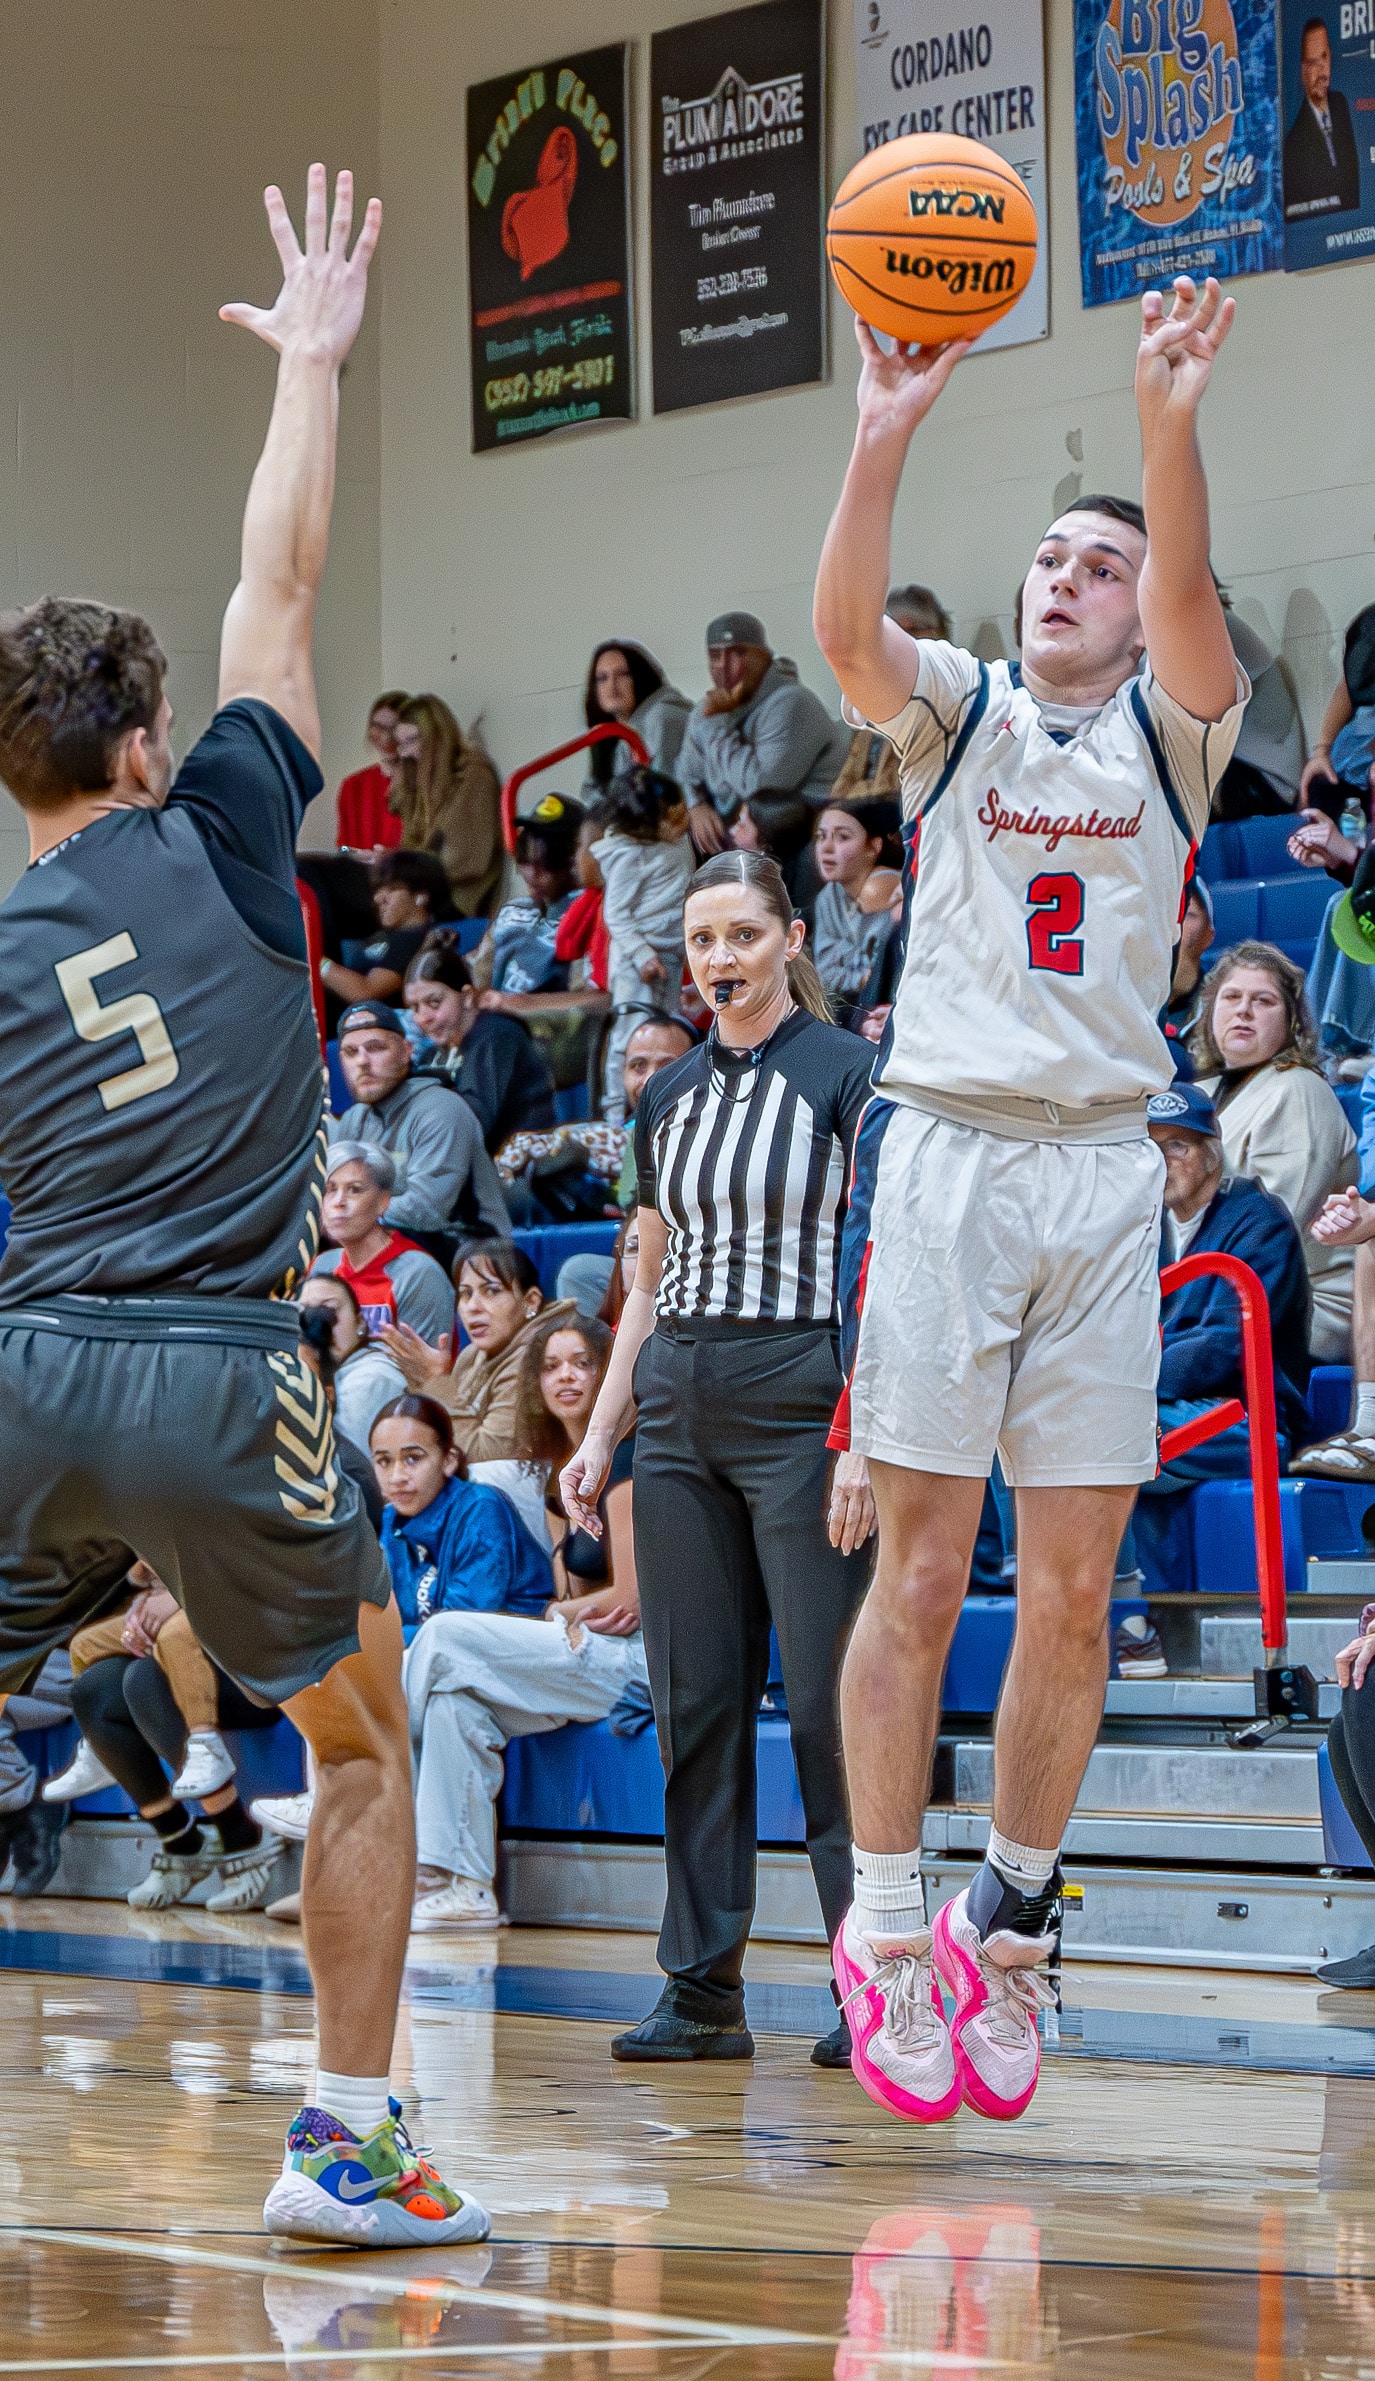 Springstead, 2, Nico Cordello shoots a three pointer in the 6A Division 4 playoff match versus Mitchell High School at Springstead High. [Photo by Joe DiCristofalo]